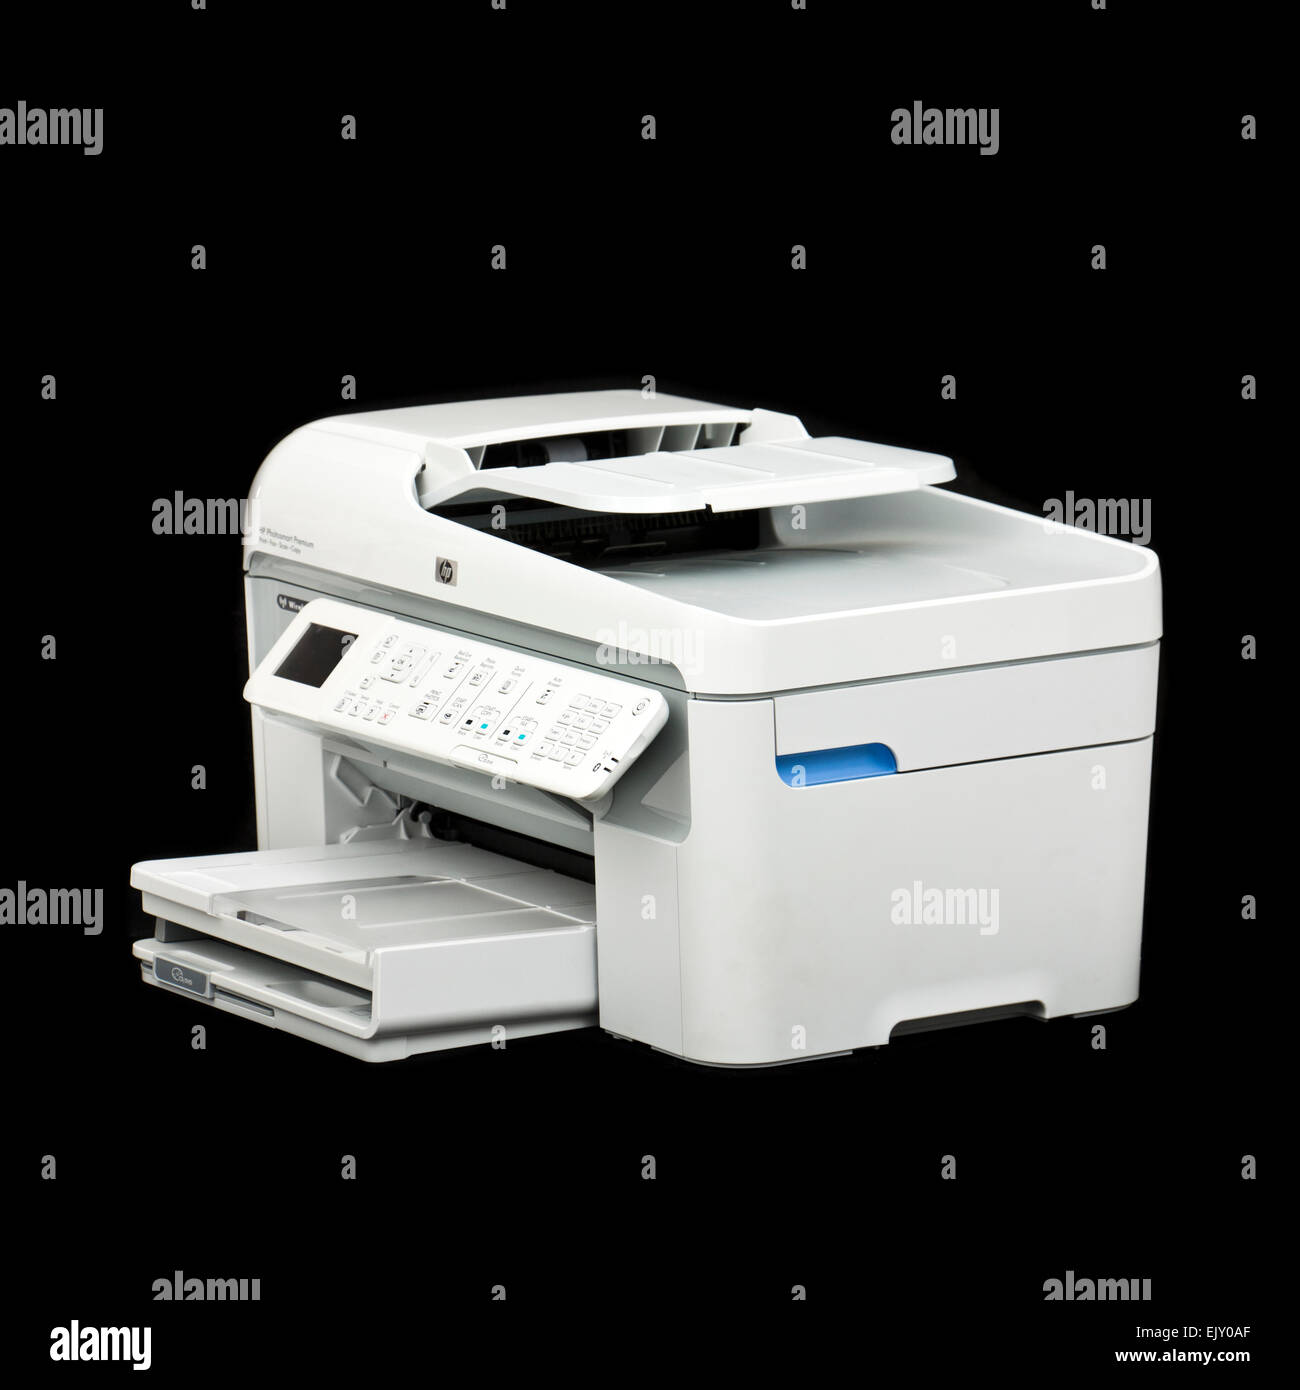 HP Photosmart Premium (C309a) All-in-One printer, scanner, fax and copier  Stock Photo - Alamy